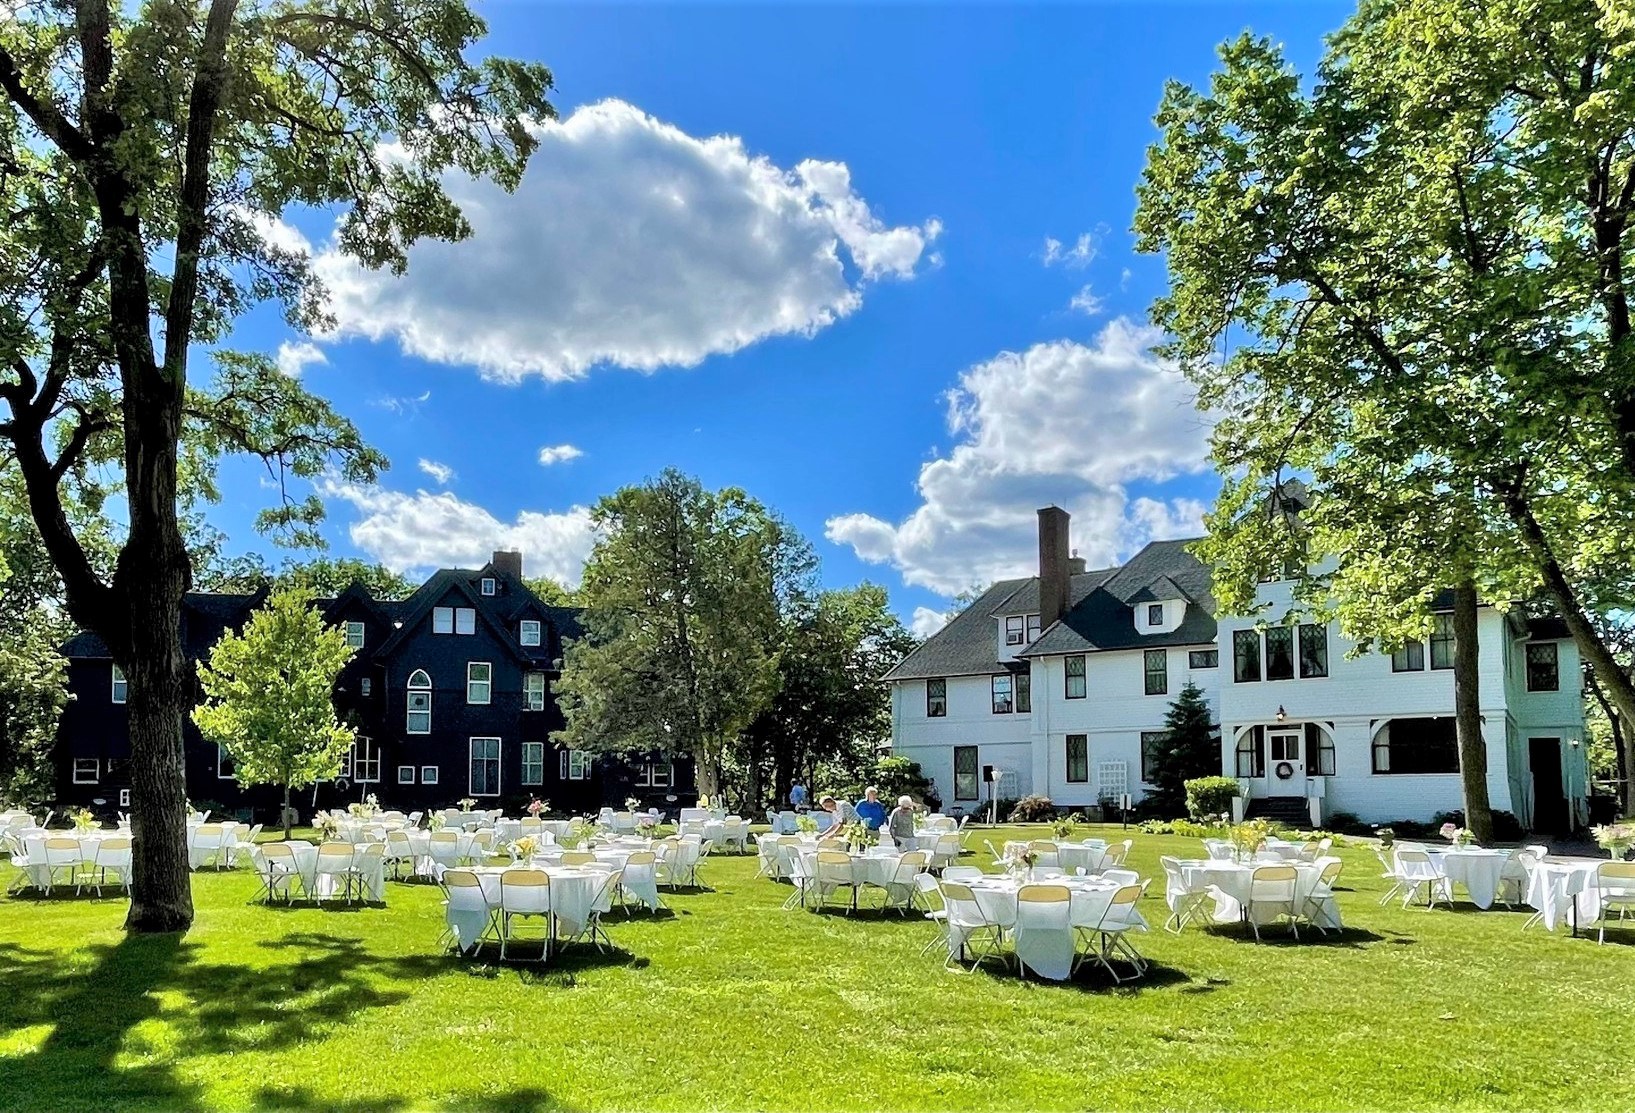 Two mansions of Minnesota lumber barons are popular destination for reunions, weddings Photo - Click Here to See